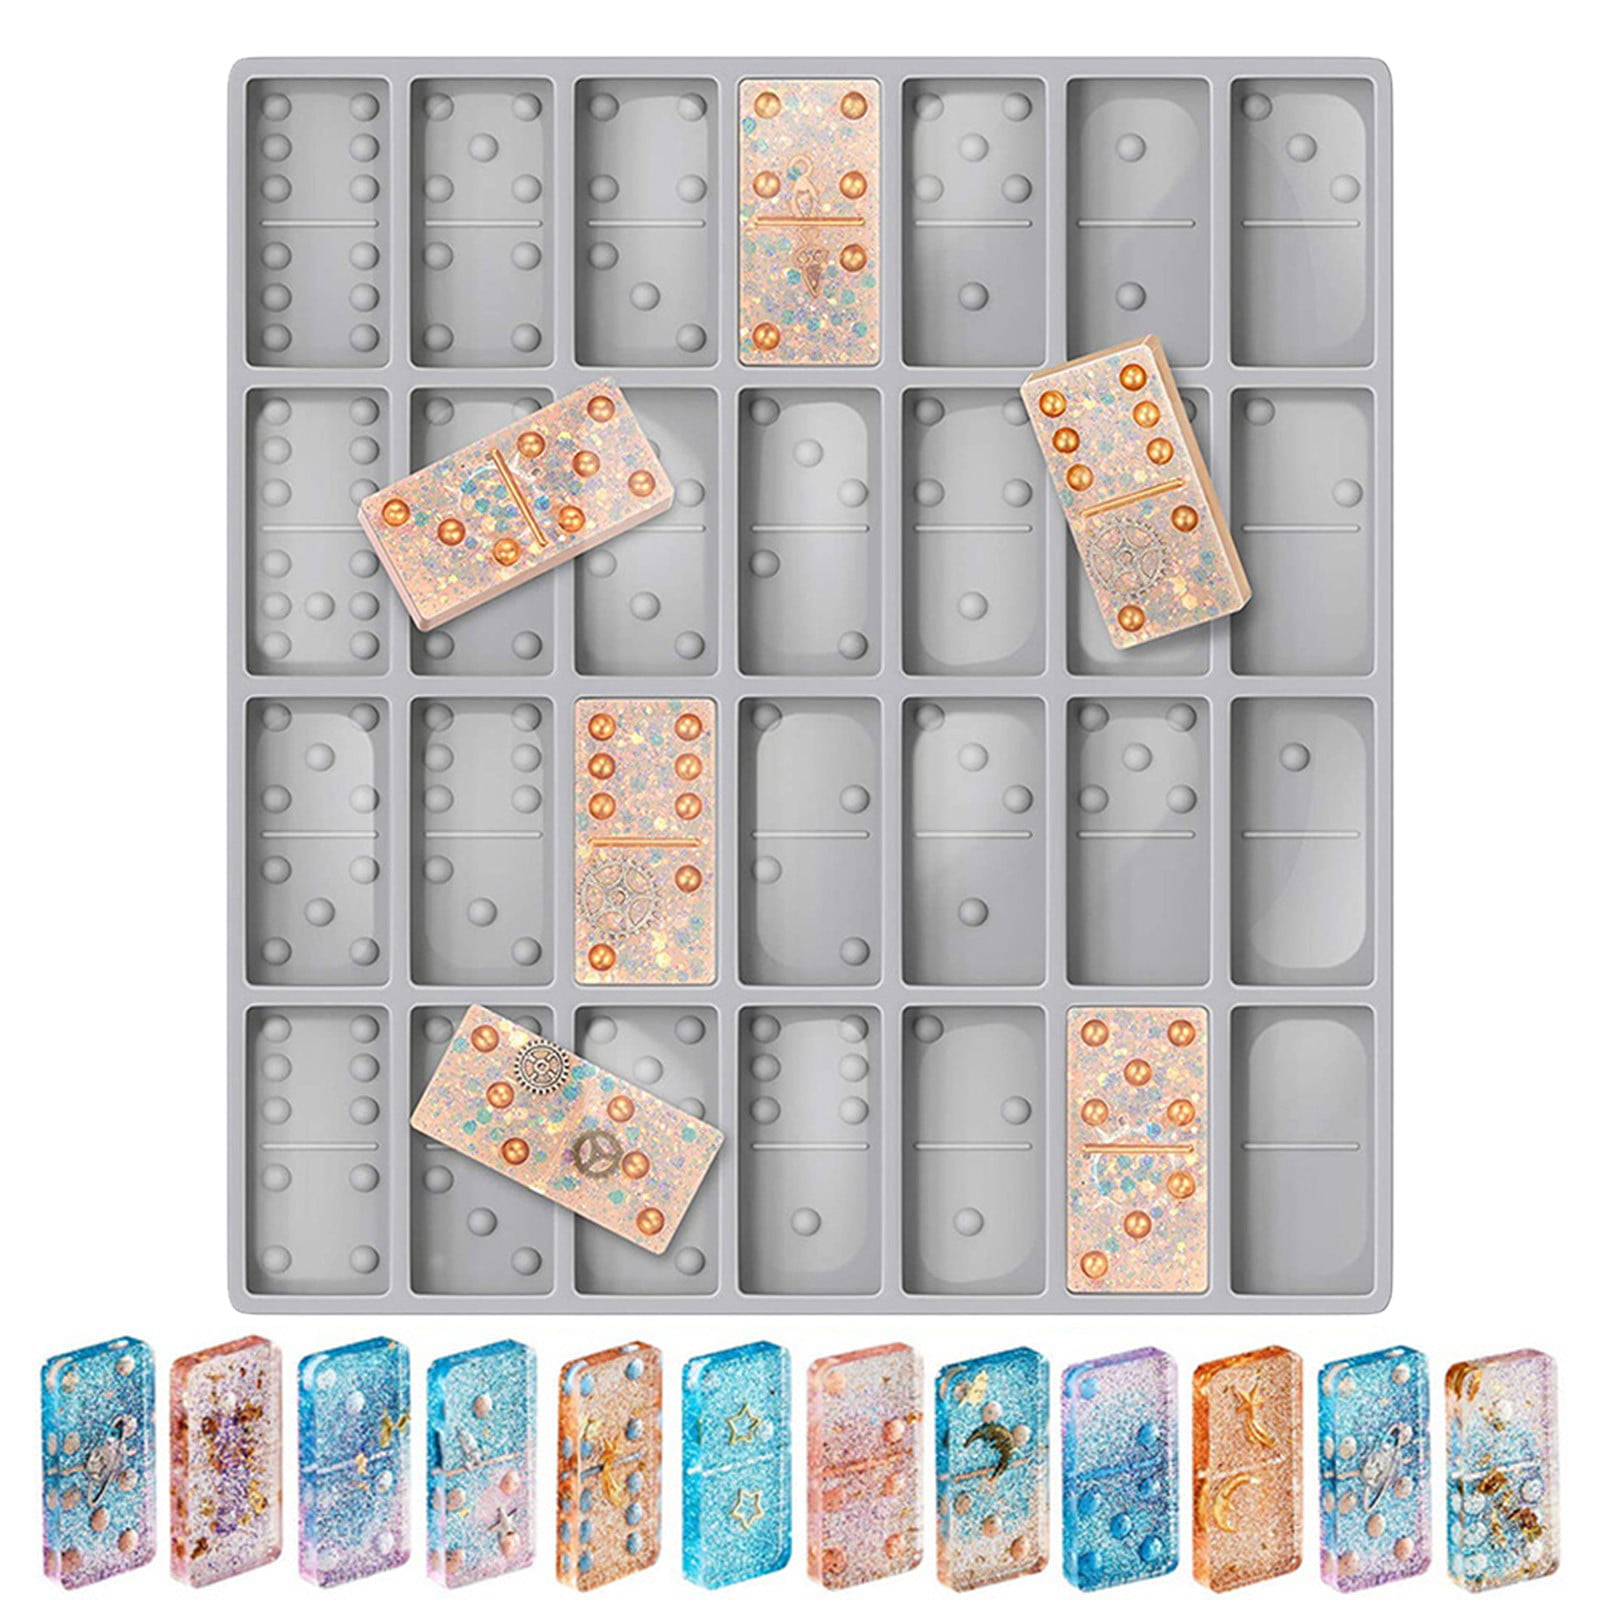 absuyy Domino Mould on Clearance- Silicone Domino Mold Resin Domino Mirror  Epoxy Resin Abrasive Mold Toy